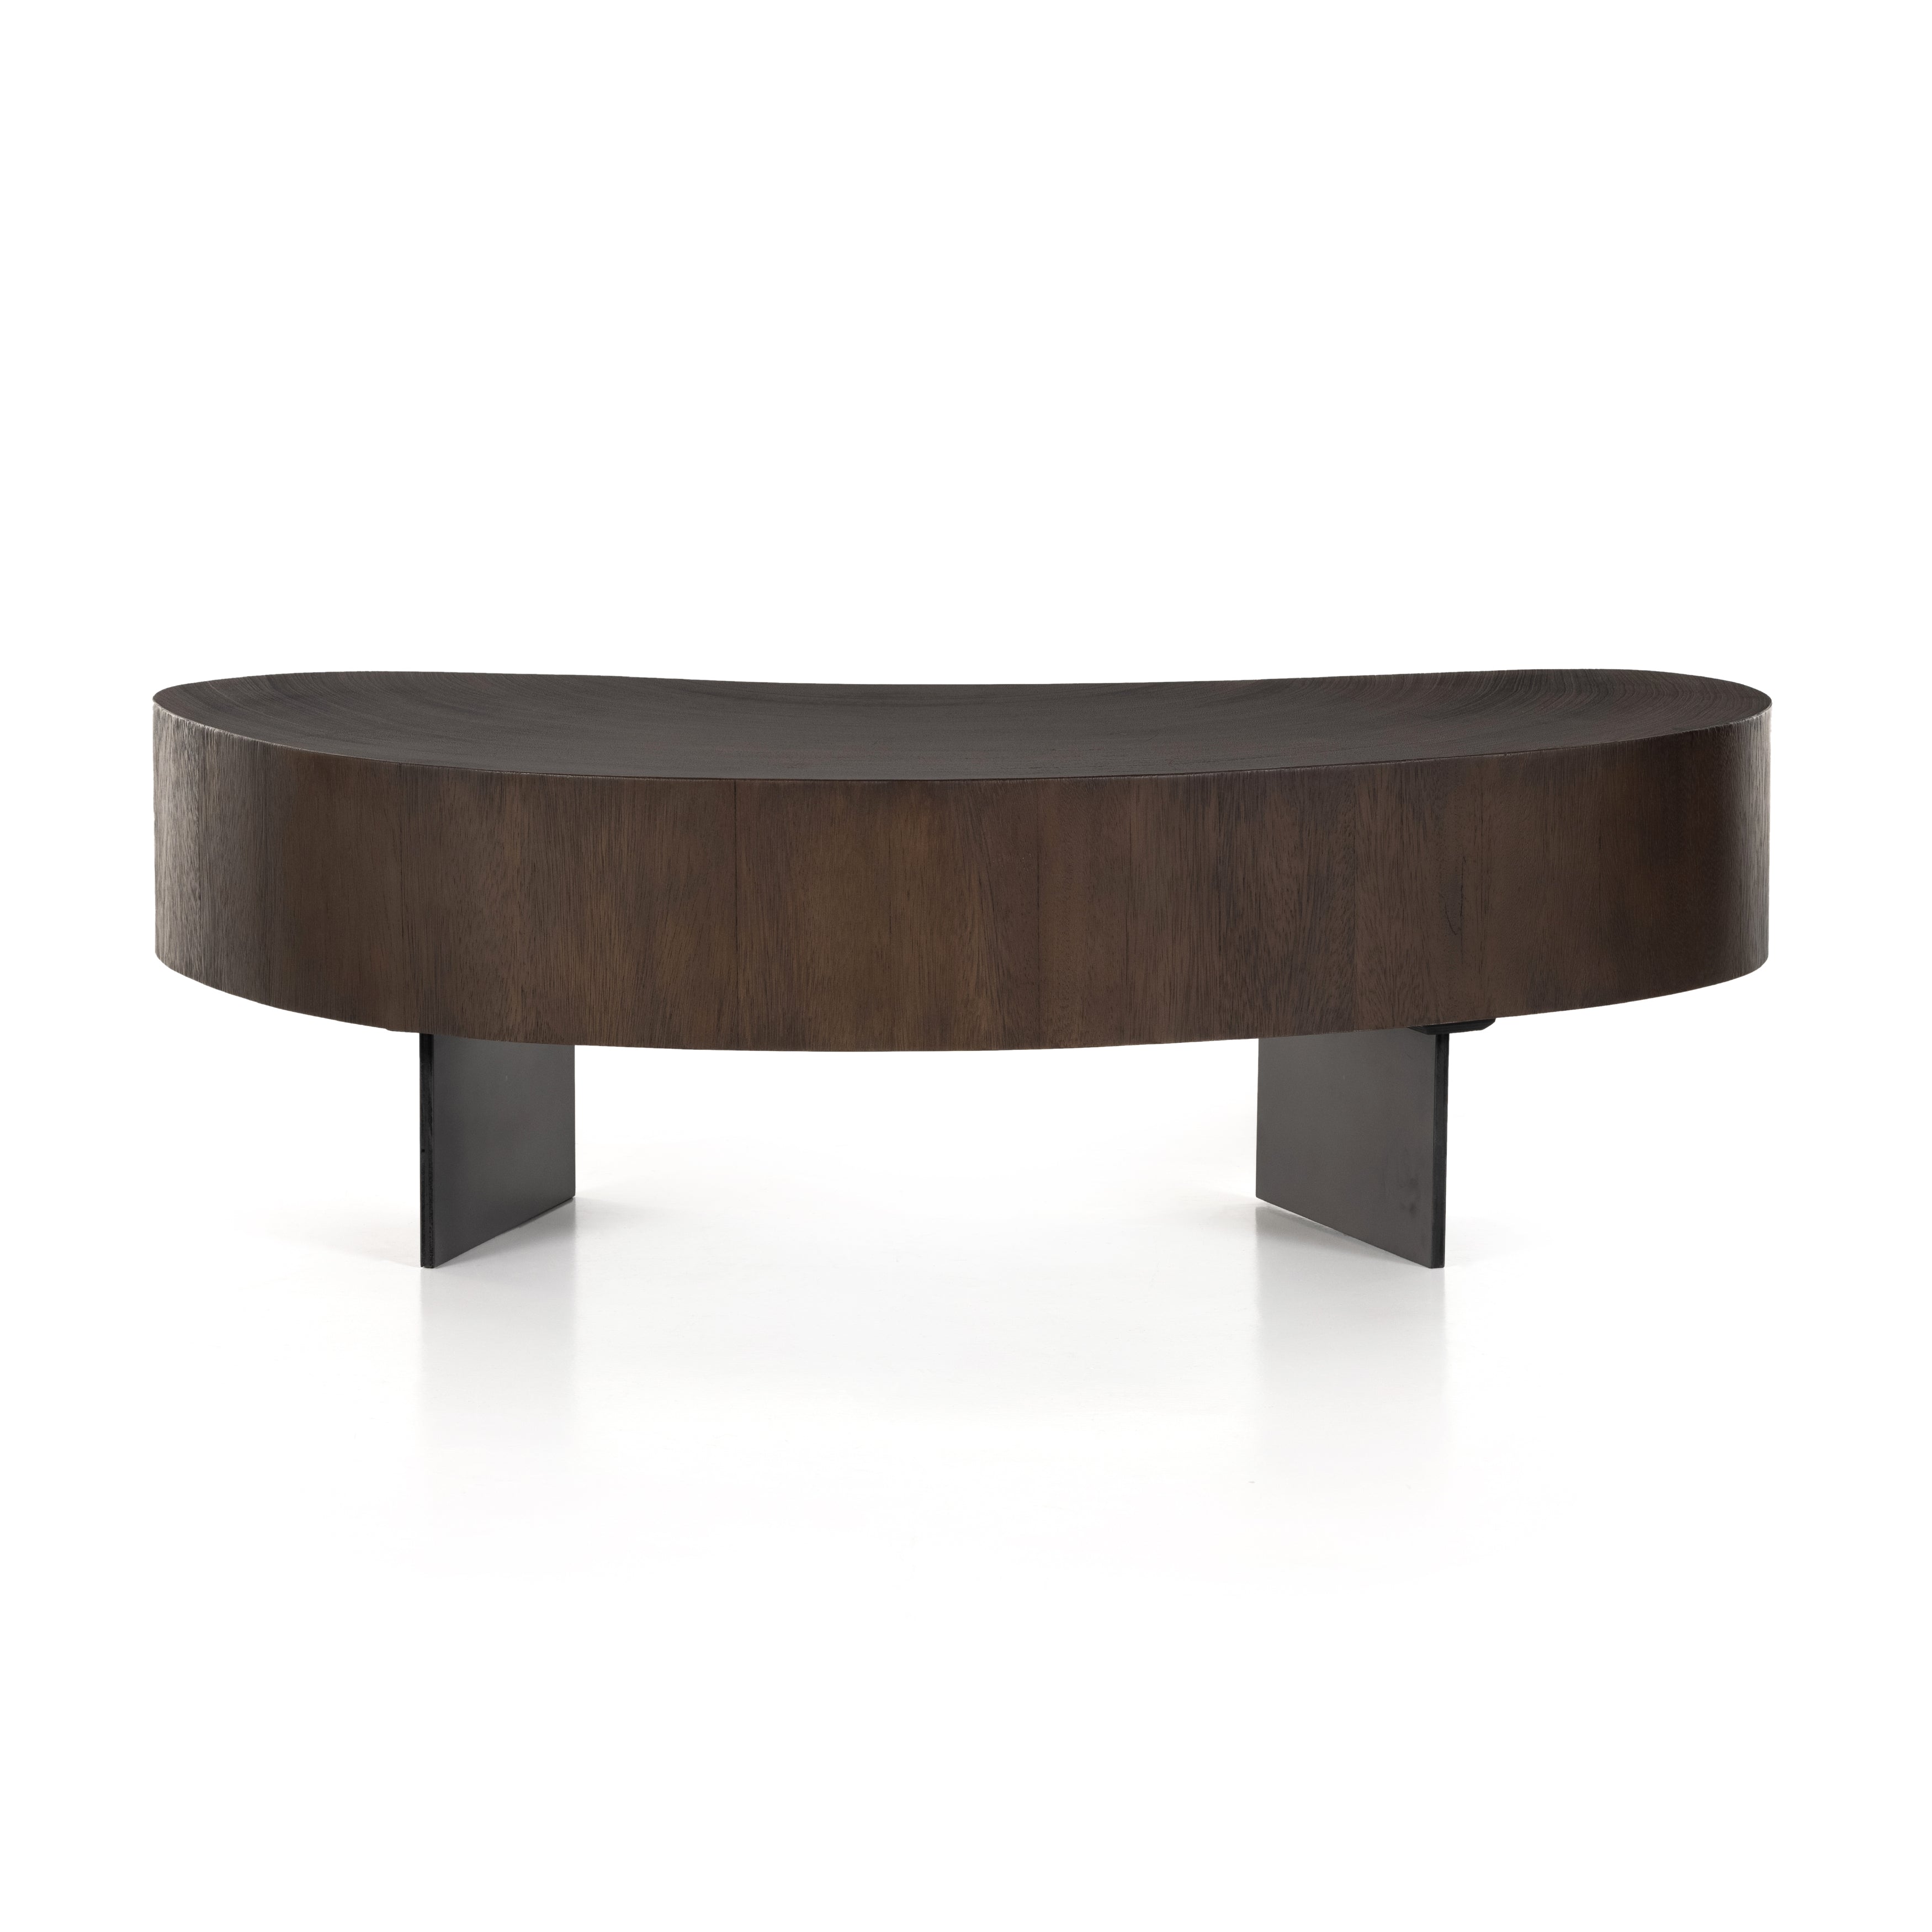 Natural beauty. Total novelty. A thick slab of oyster-cut Guanacaste forms a tall, kidney-shaped coffee table. Visible rings speak to woods' natural graining, with a dark gunmetal-finished base below. Amethyst Home provides interior design, new construction, custom furniture, and area rugs in the Calabasas metro area.